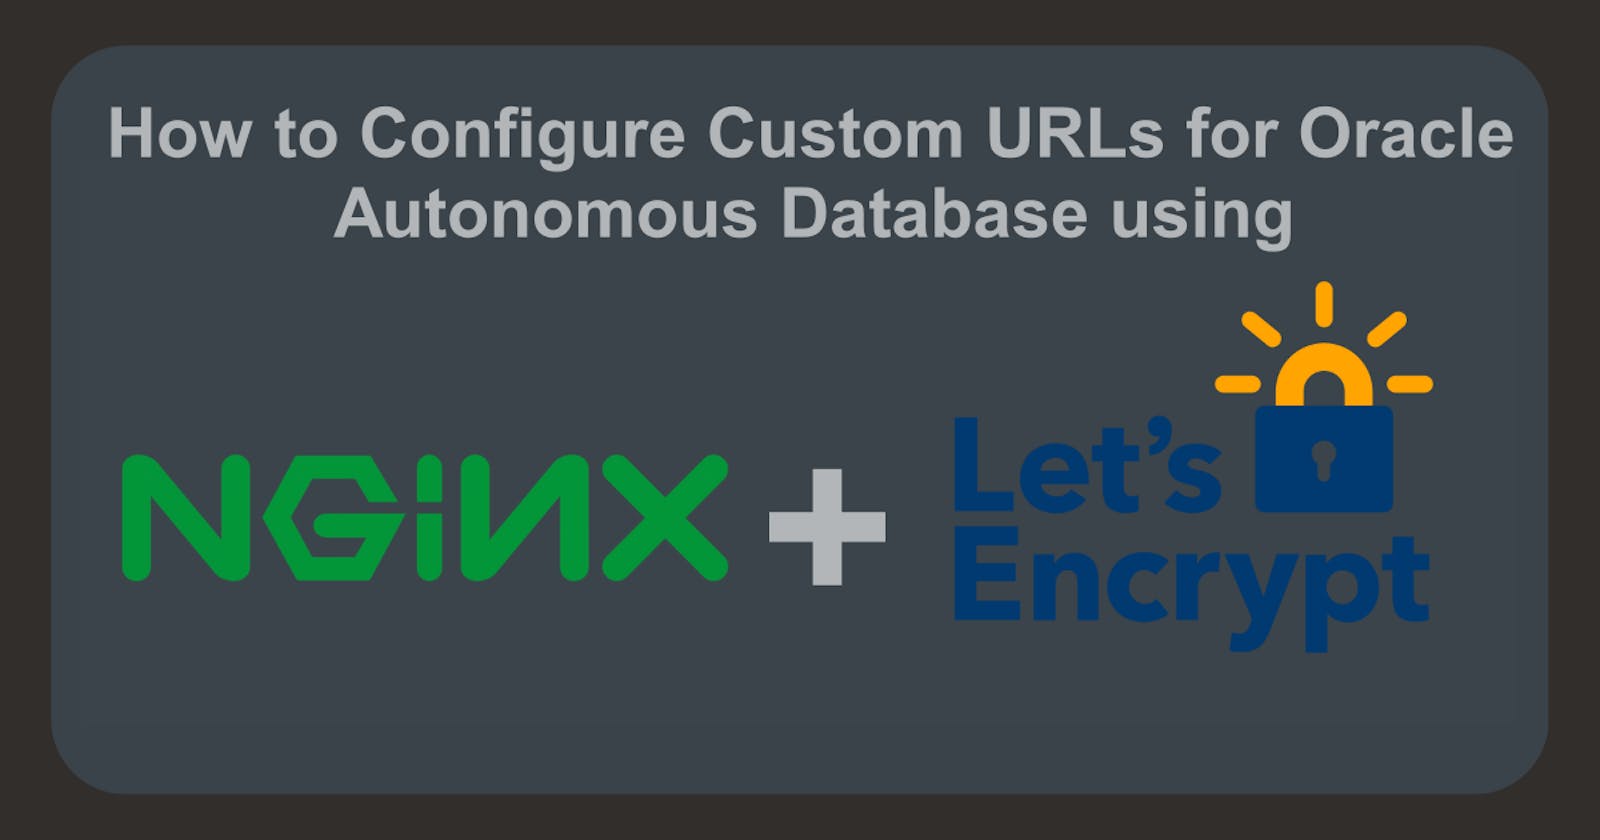 How to Configure Custom URLs for Oracle Autonomous Database using NginX and Let's Encrypt